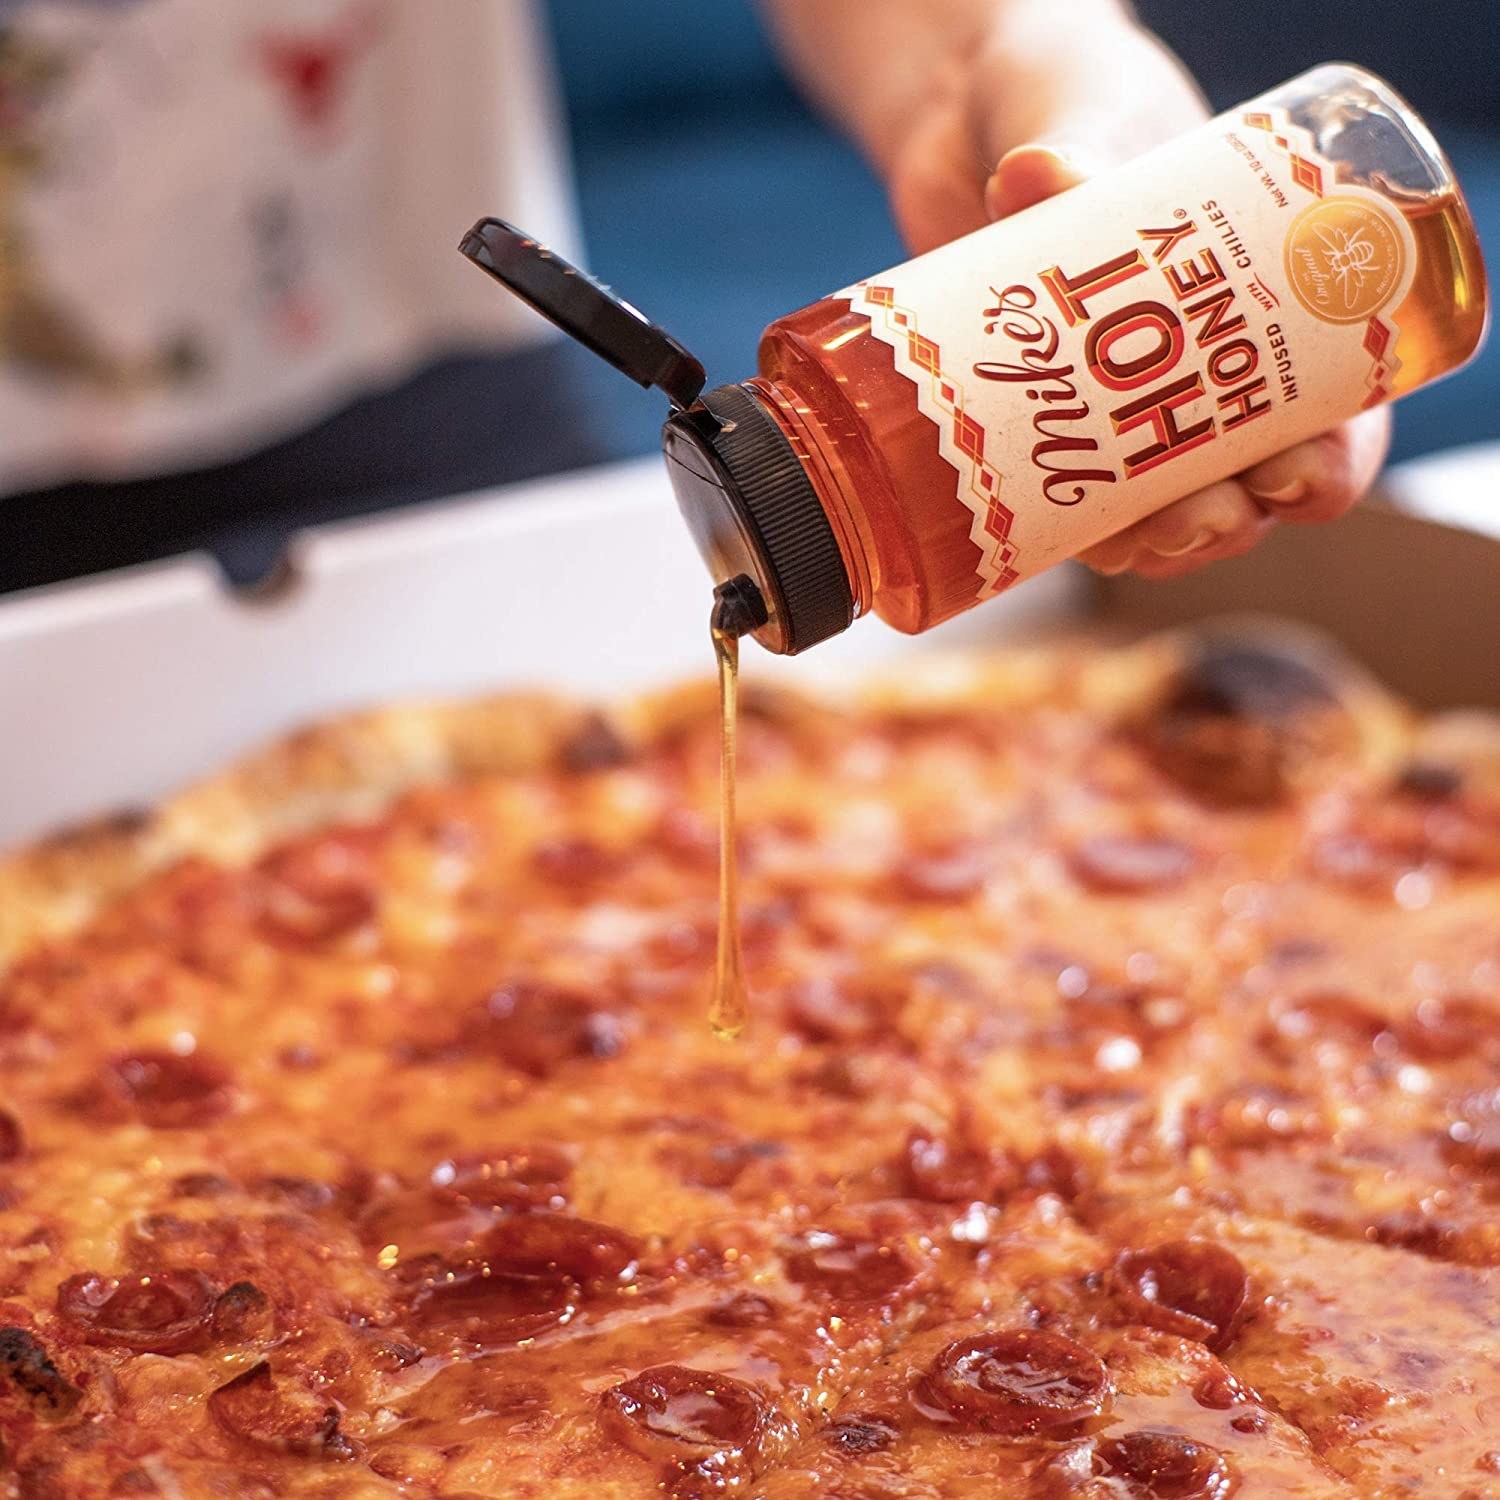 The hot honey being drizzled on pepperoni pizza